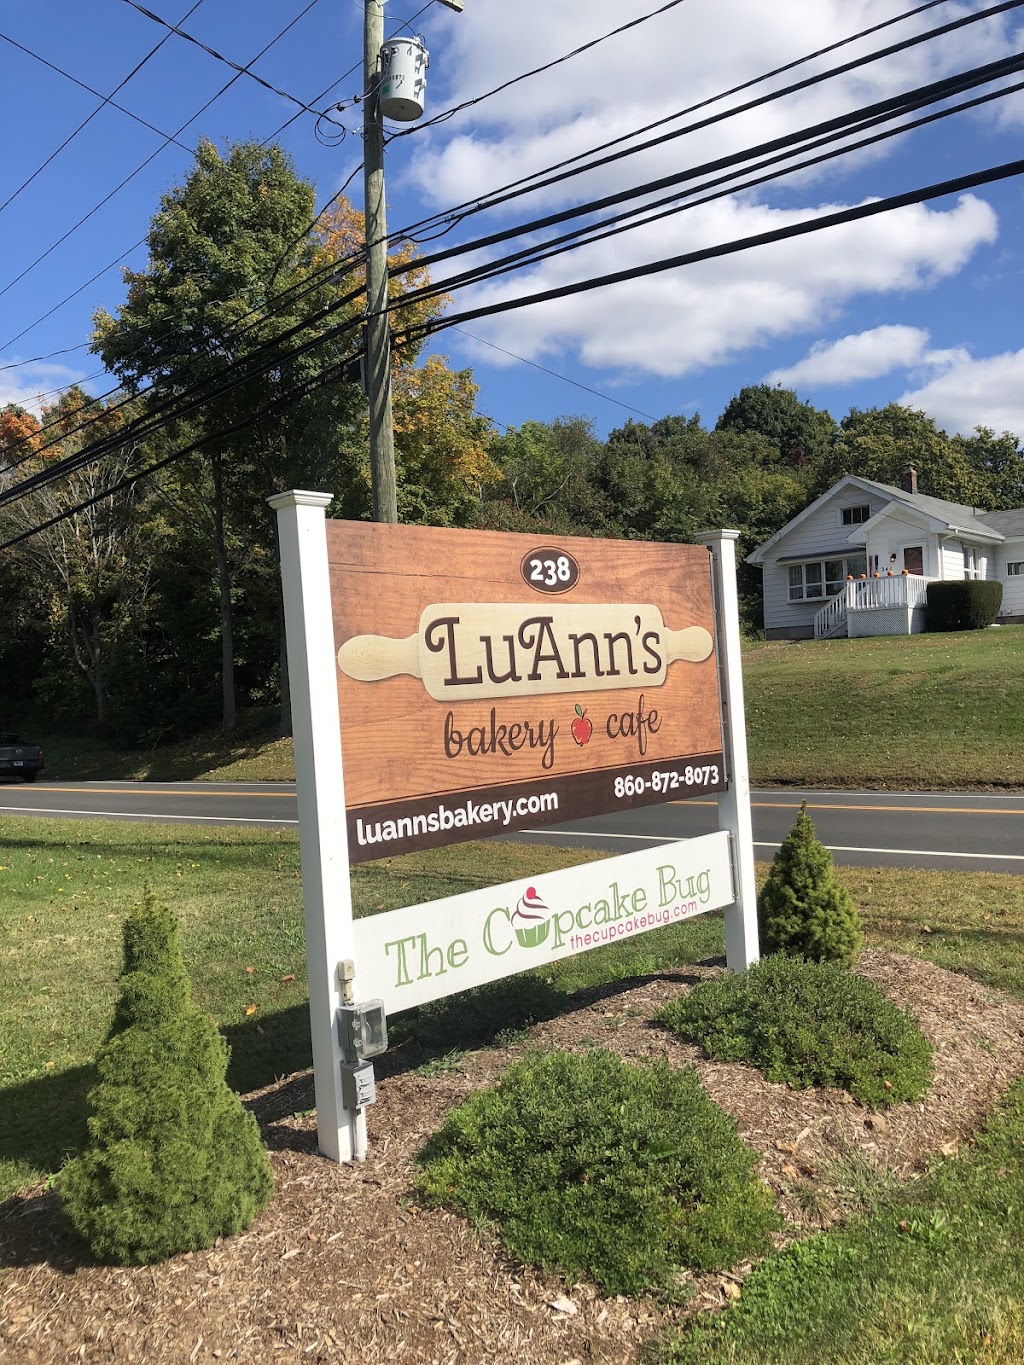 LuAnns Bakery & Cafe | 238 Somers Rd, Ellington, CT 06029 | Phone: (860) 872-8073